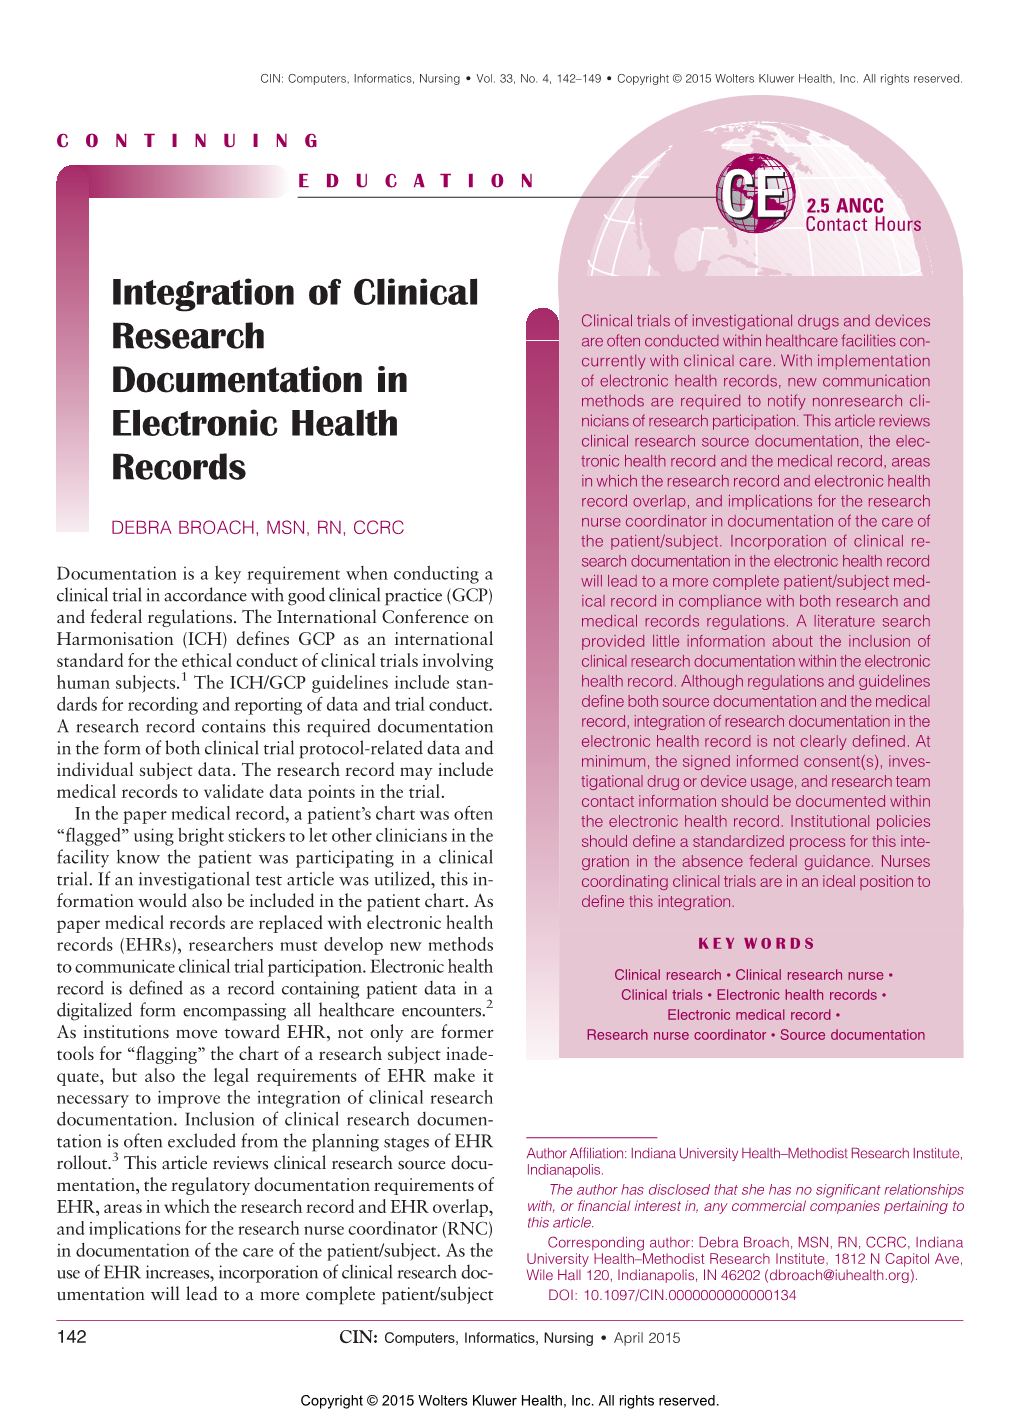 Integration of Clinical Research Documentation in Electronic Health